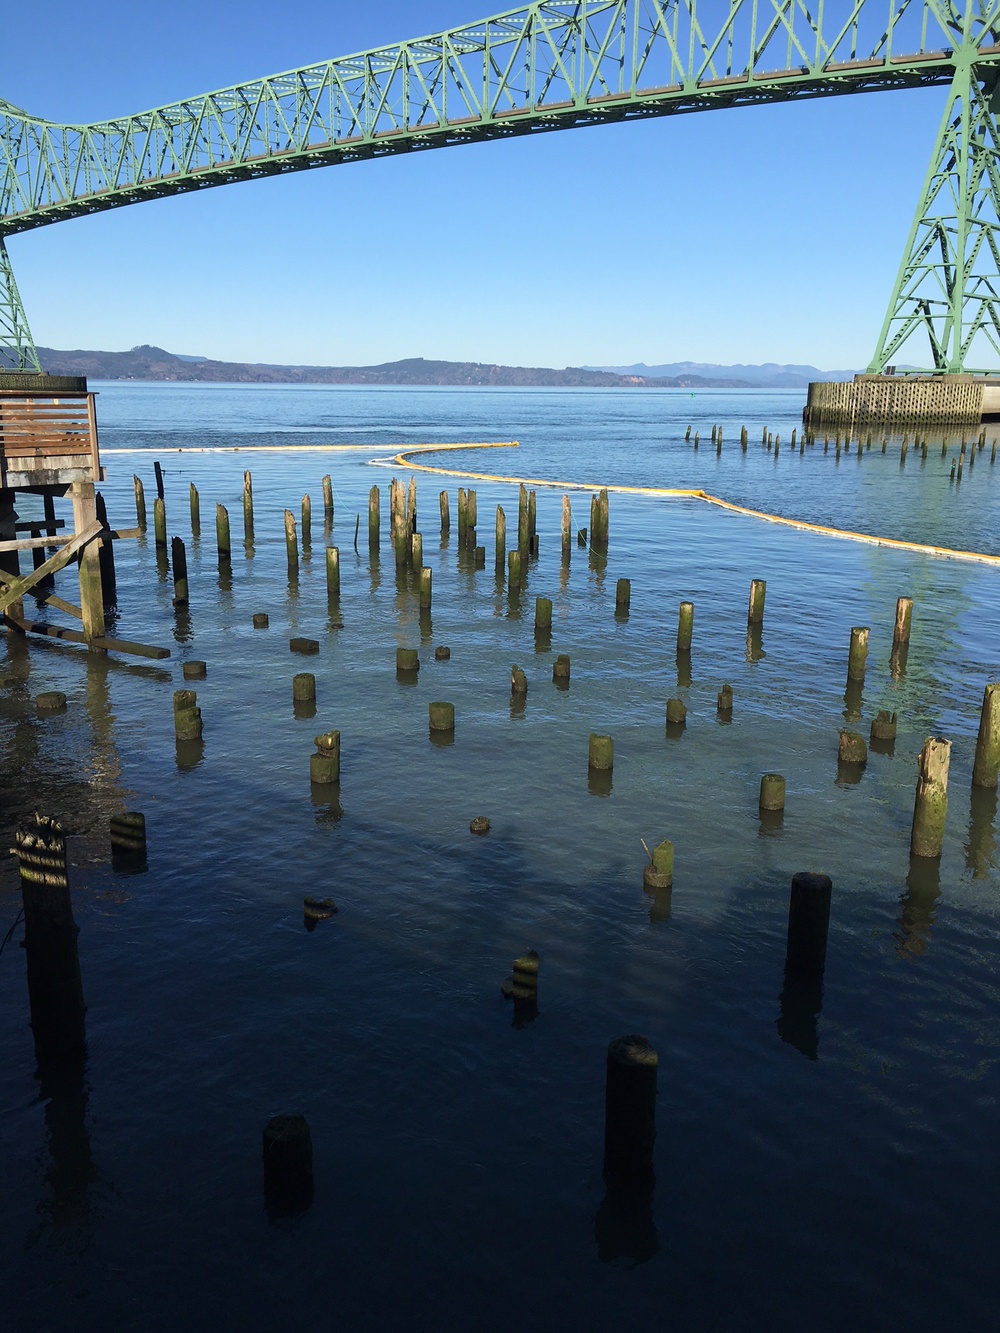 Cleanup of Astoria oil spill winding down